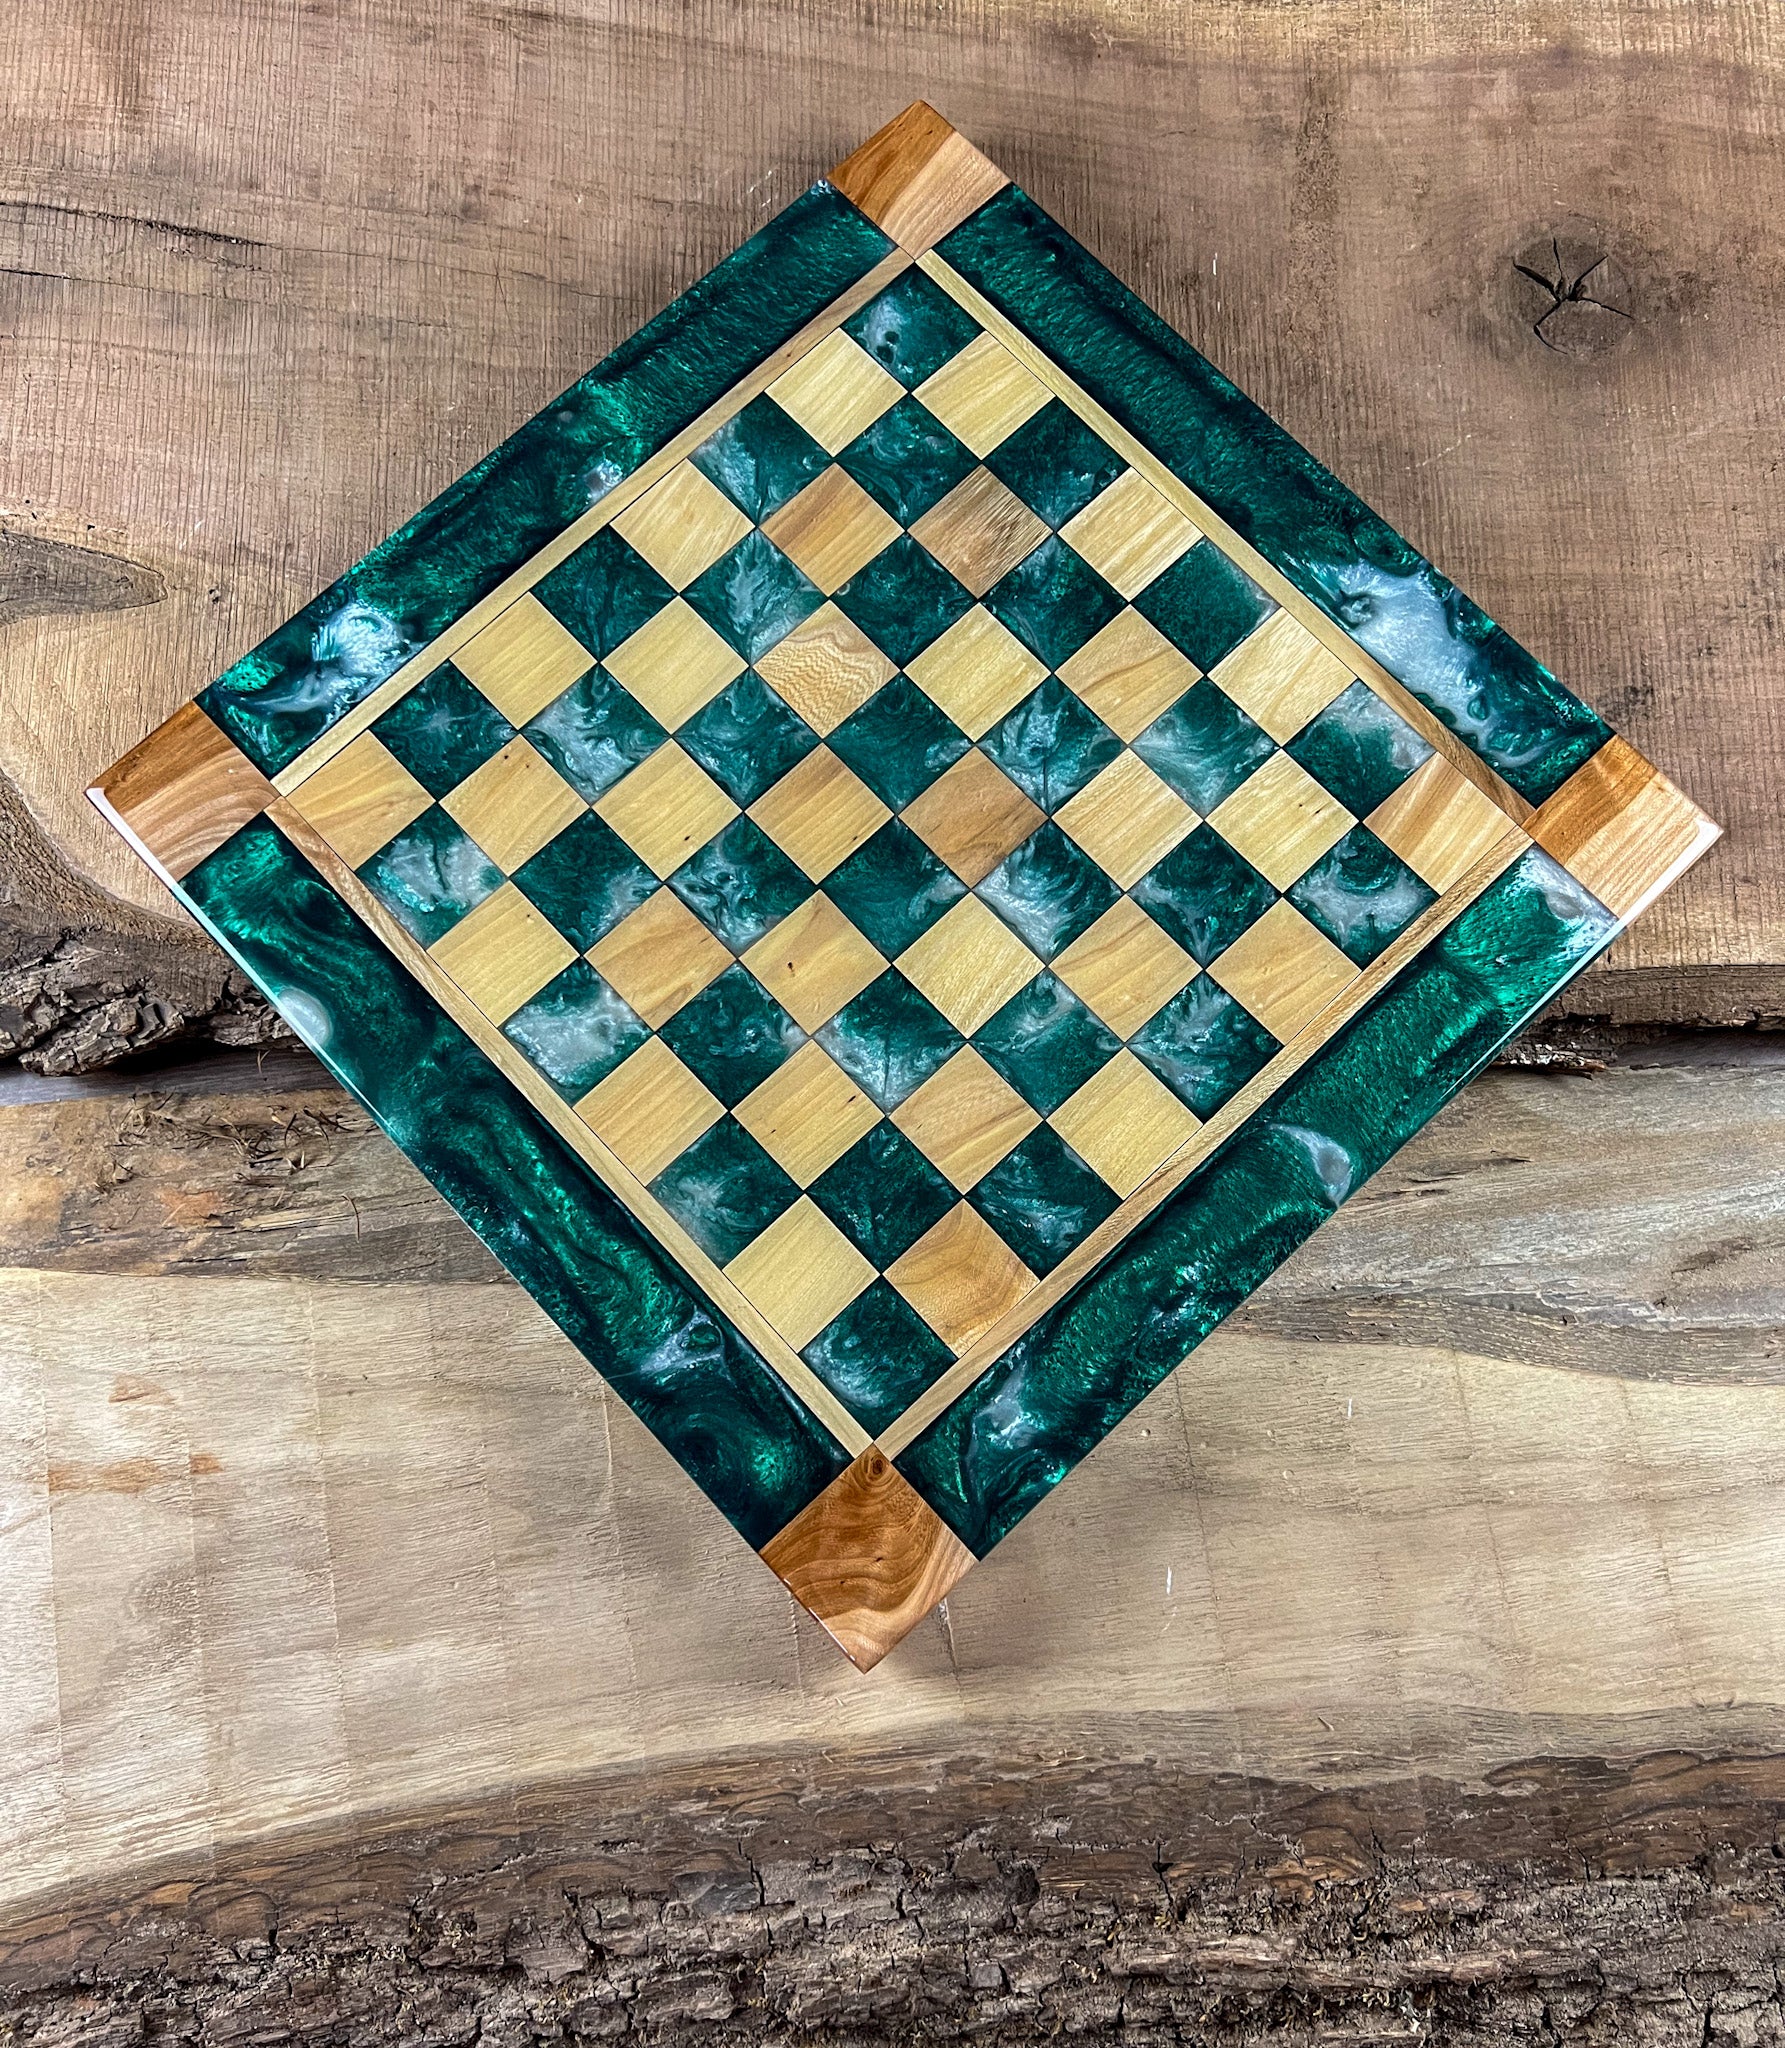 Pearl Emerald Green Maple Wood Chess Board (With Border)